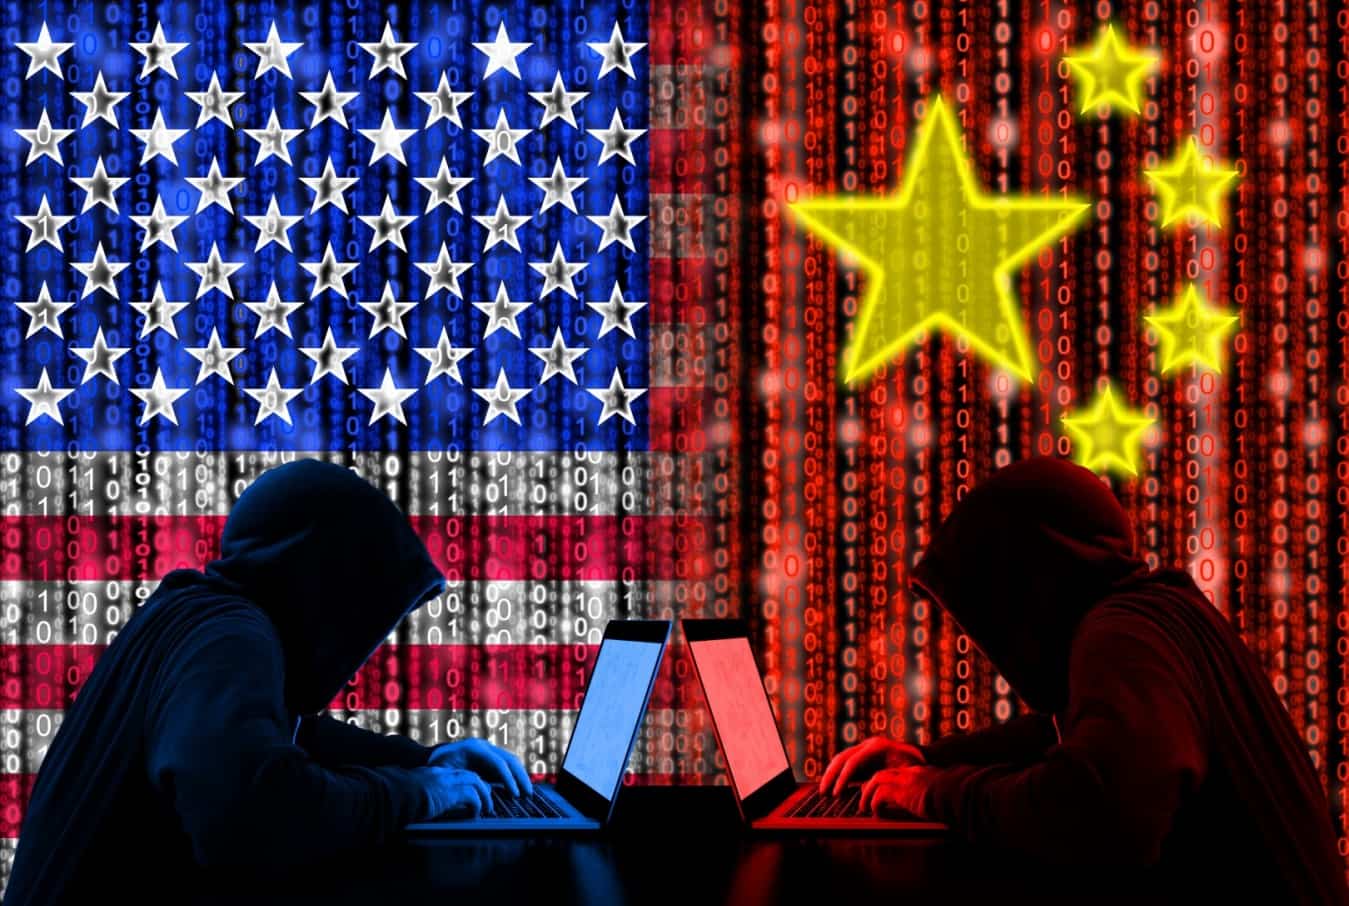 Chinese hackers accessed NSA hacking tools before Shadow Brokers leak